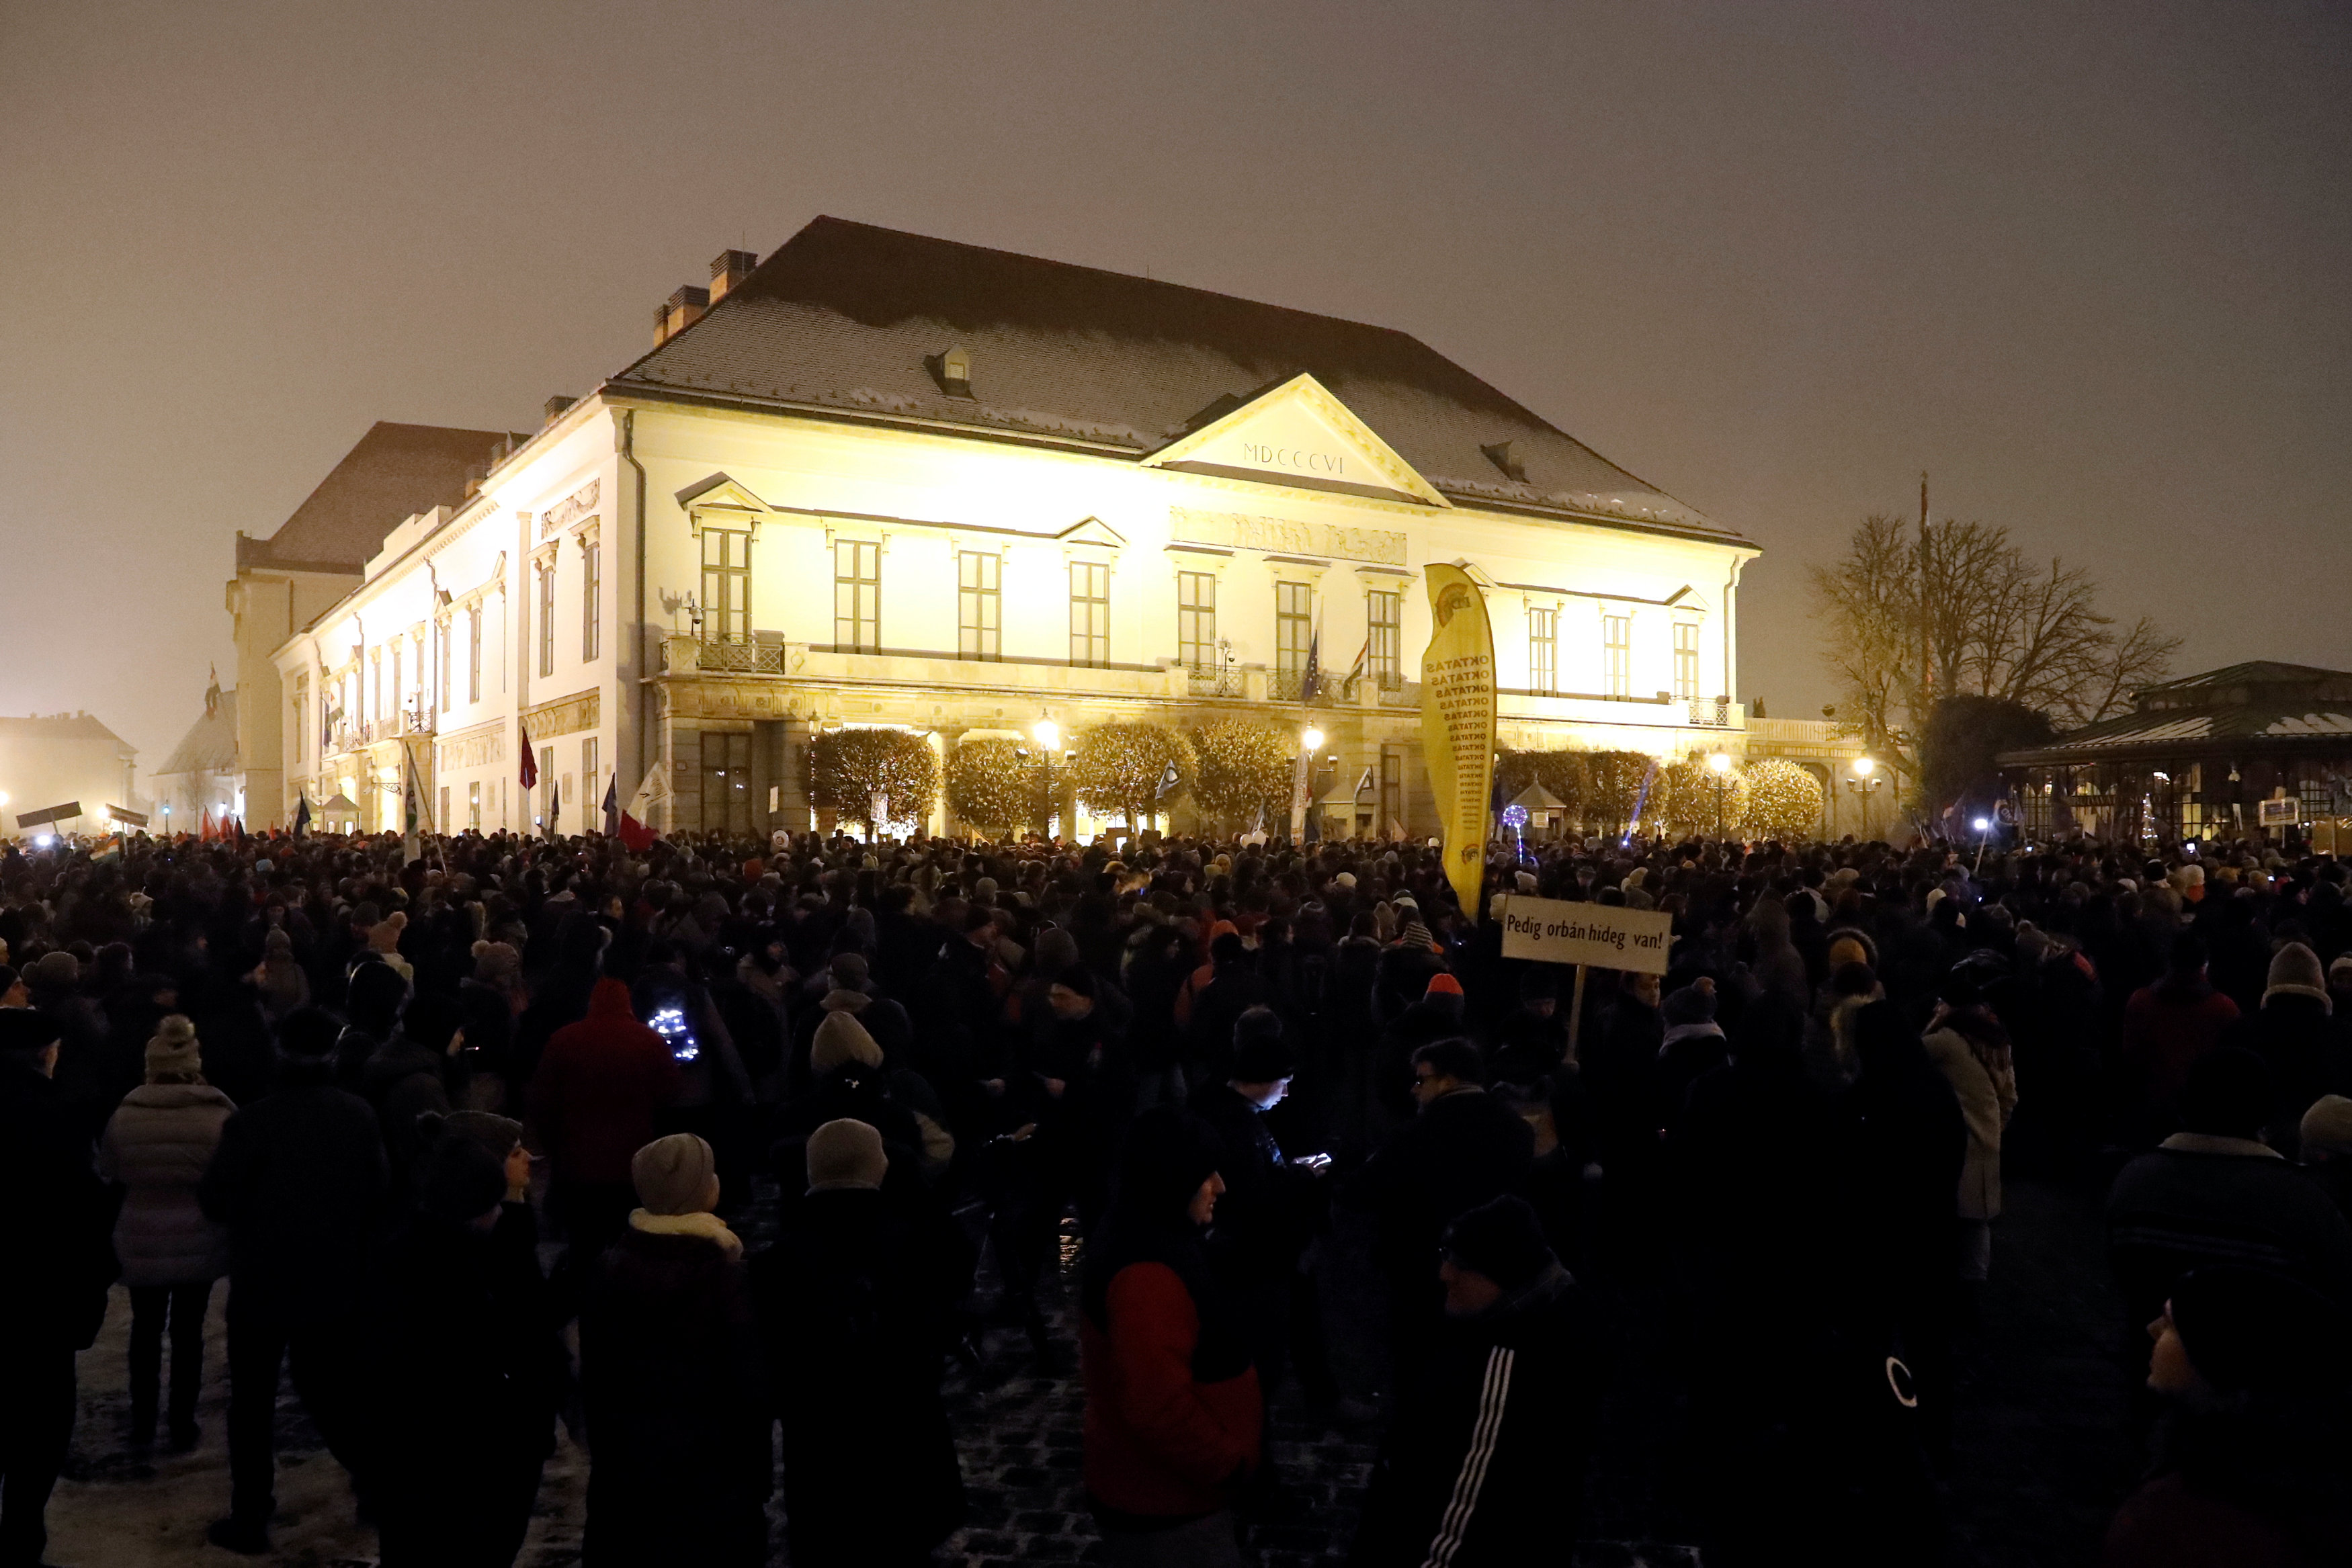 2018-12-21T214544Z_29752985_RC1BC0235540_RTRMADP_3_HUNGARY-PROTEST